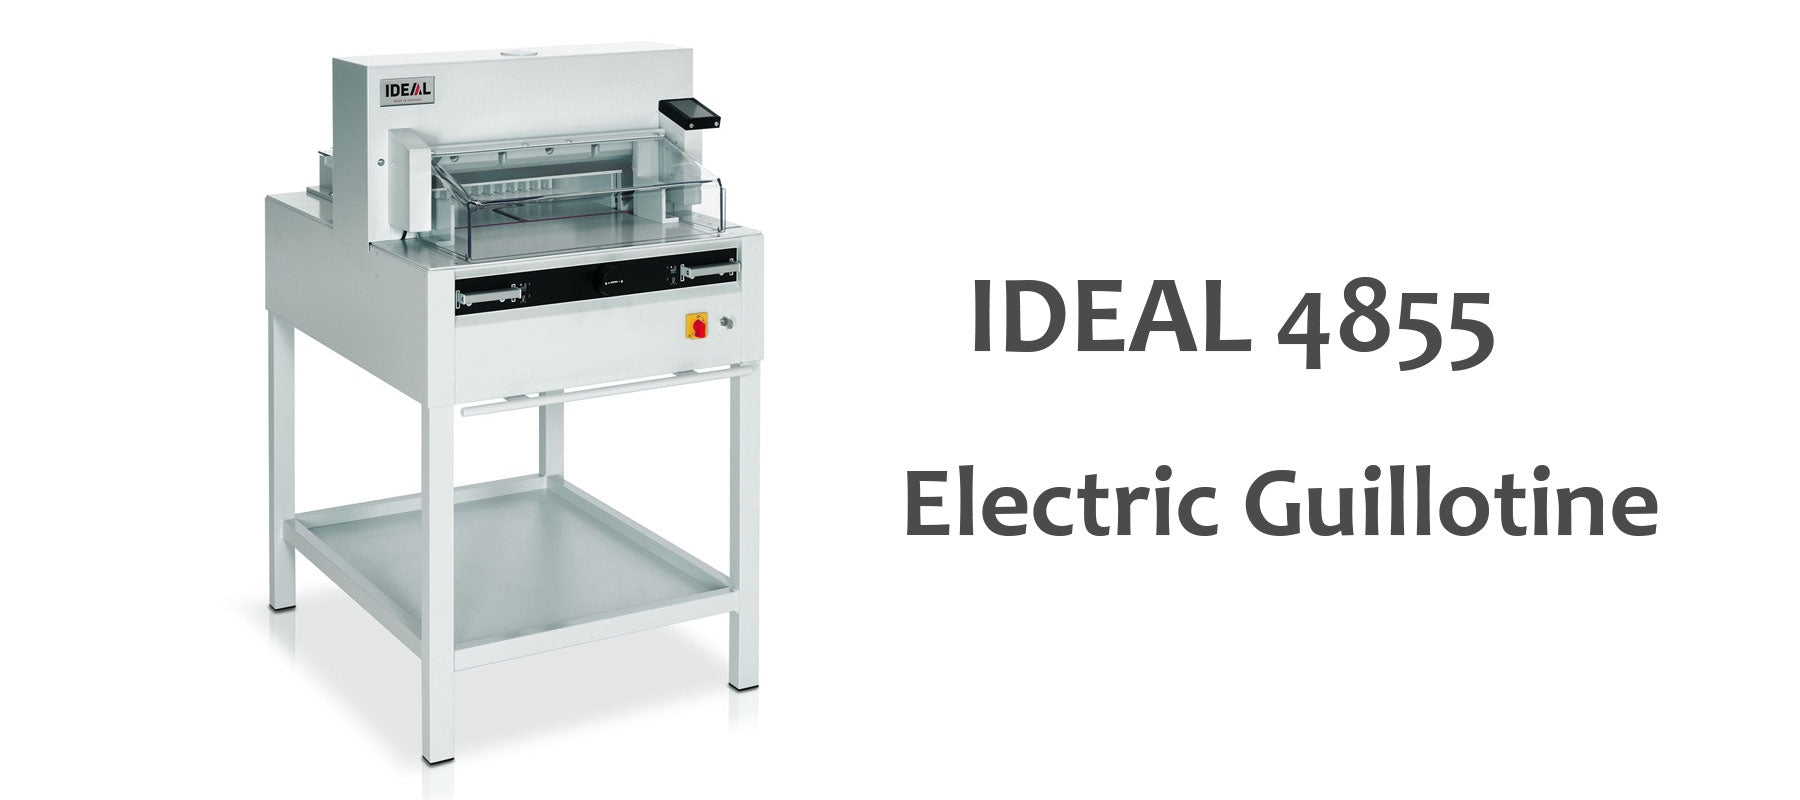 IDEAL 4855 Electric Guillotine